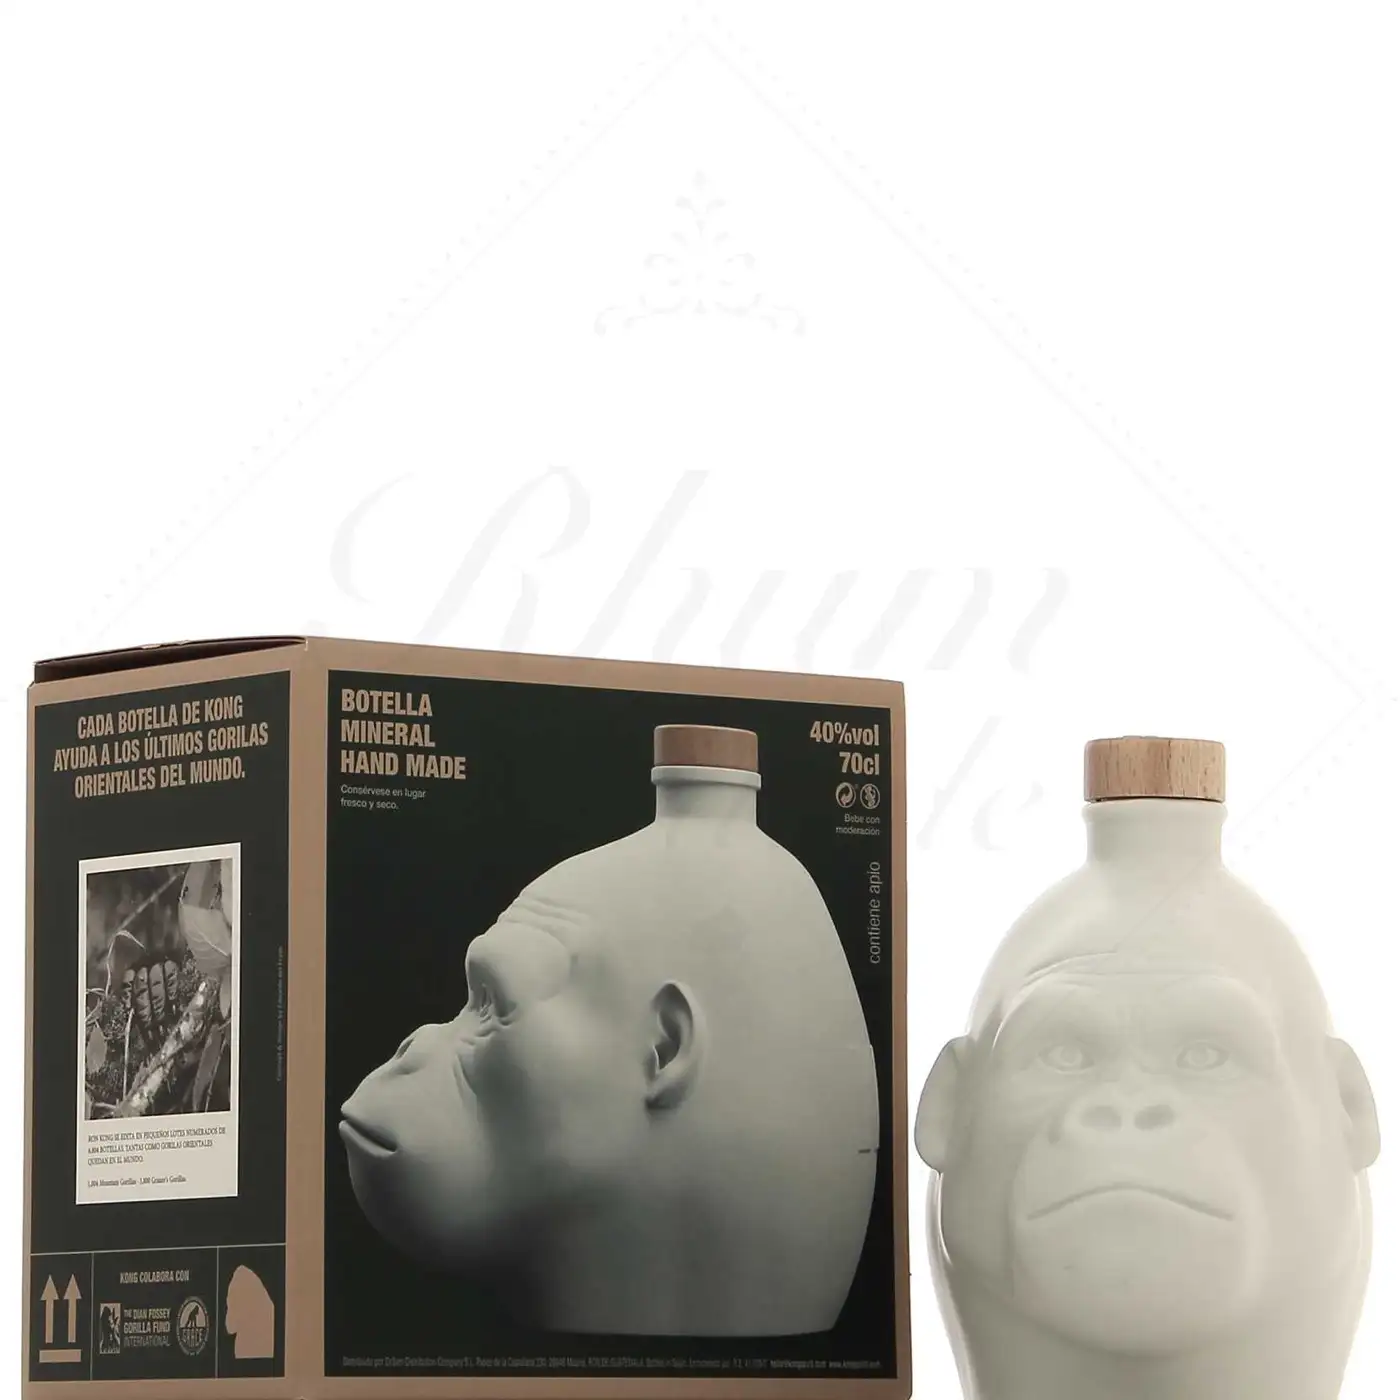 Image of the front of the bottle of the rum Kong Ron